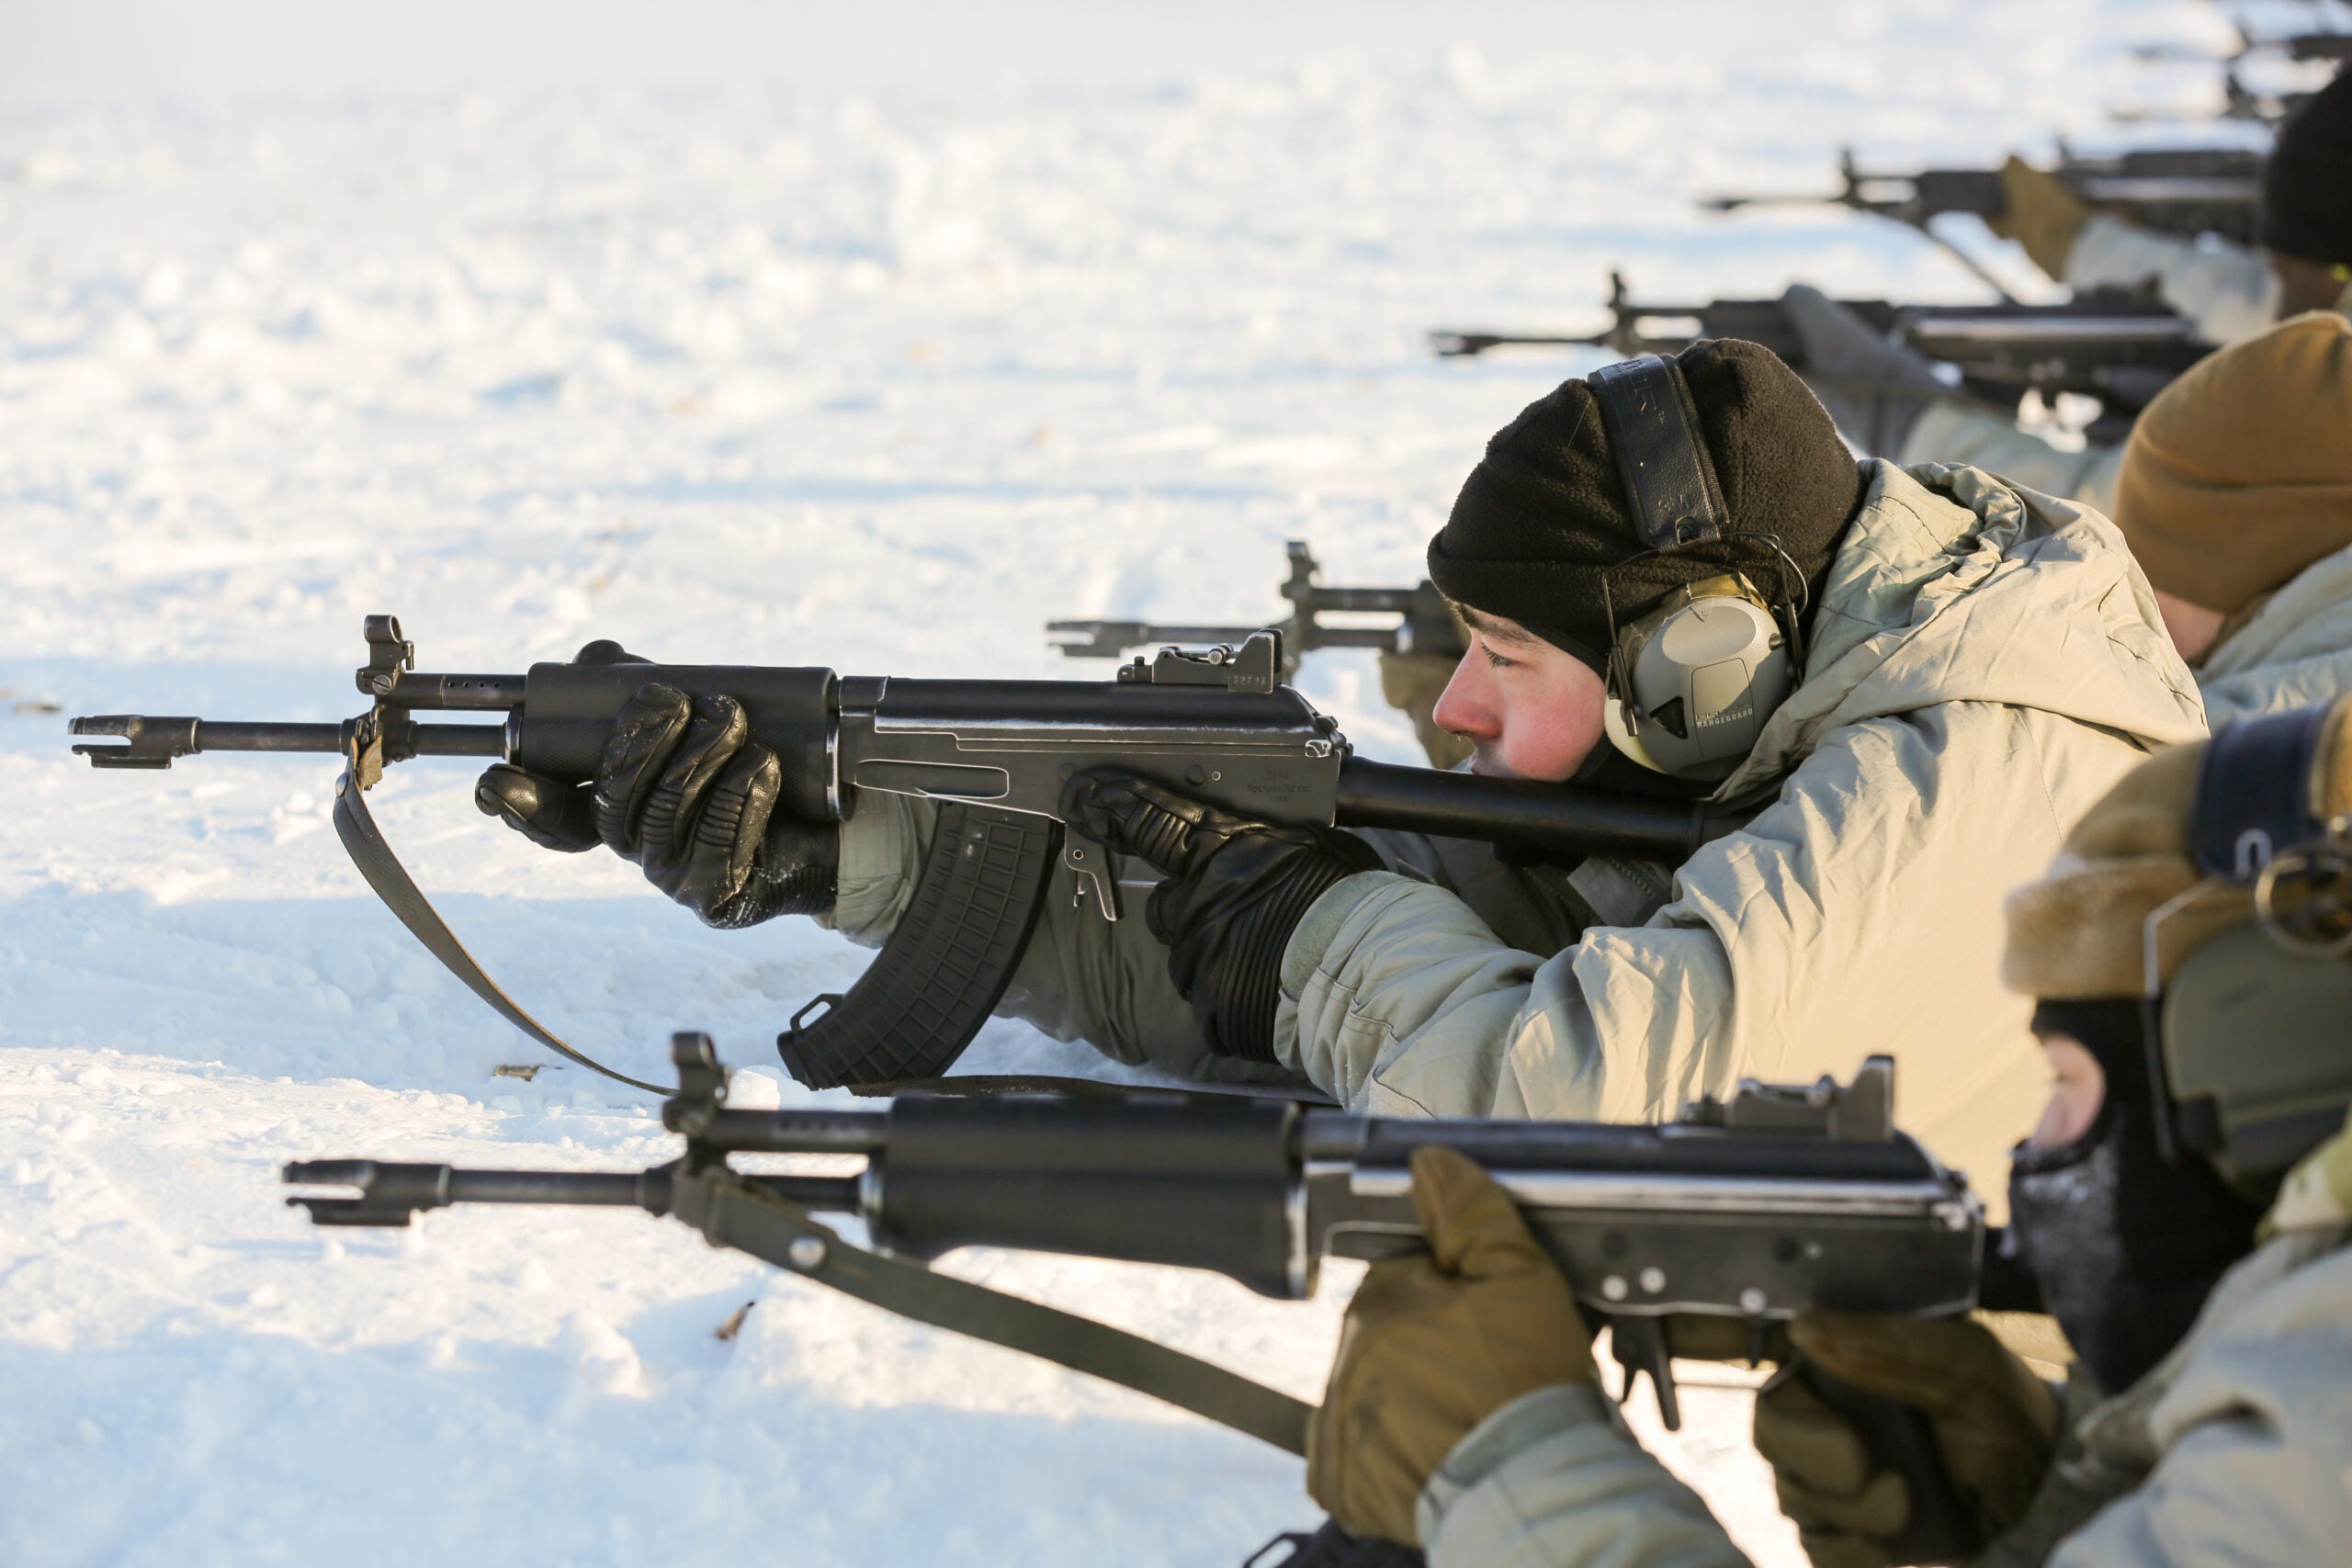 Soldiers from Charlie Troop, 3-71 Cavalry Regiment, 1st Brigade Combat Team, 10th Mountain Division, participate in a weapons familiarization training event using Finland’s 7.62mm RK62 assault rifle during Exercise Arctic Forge in Sodankyla Garrison, Finland on Feb. 22, 2023. Exercise Arctic Forge 23 is a U.S. Army Europe and Africa led umbrella exercise that leverages the host-nation exercises Defense Exercise North in Finland, and exercise Joint Viking in Norway, taking place Feb. 16 through March 17, 2023, focused on building capabilities and cooperation in support of the U.S. Army's Arctic Strategy. (U.S. Army photo by Sgt. 1st Class Matthew Keeler)